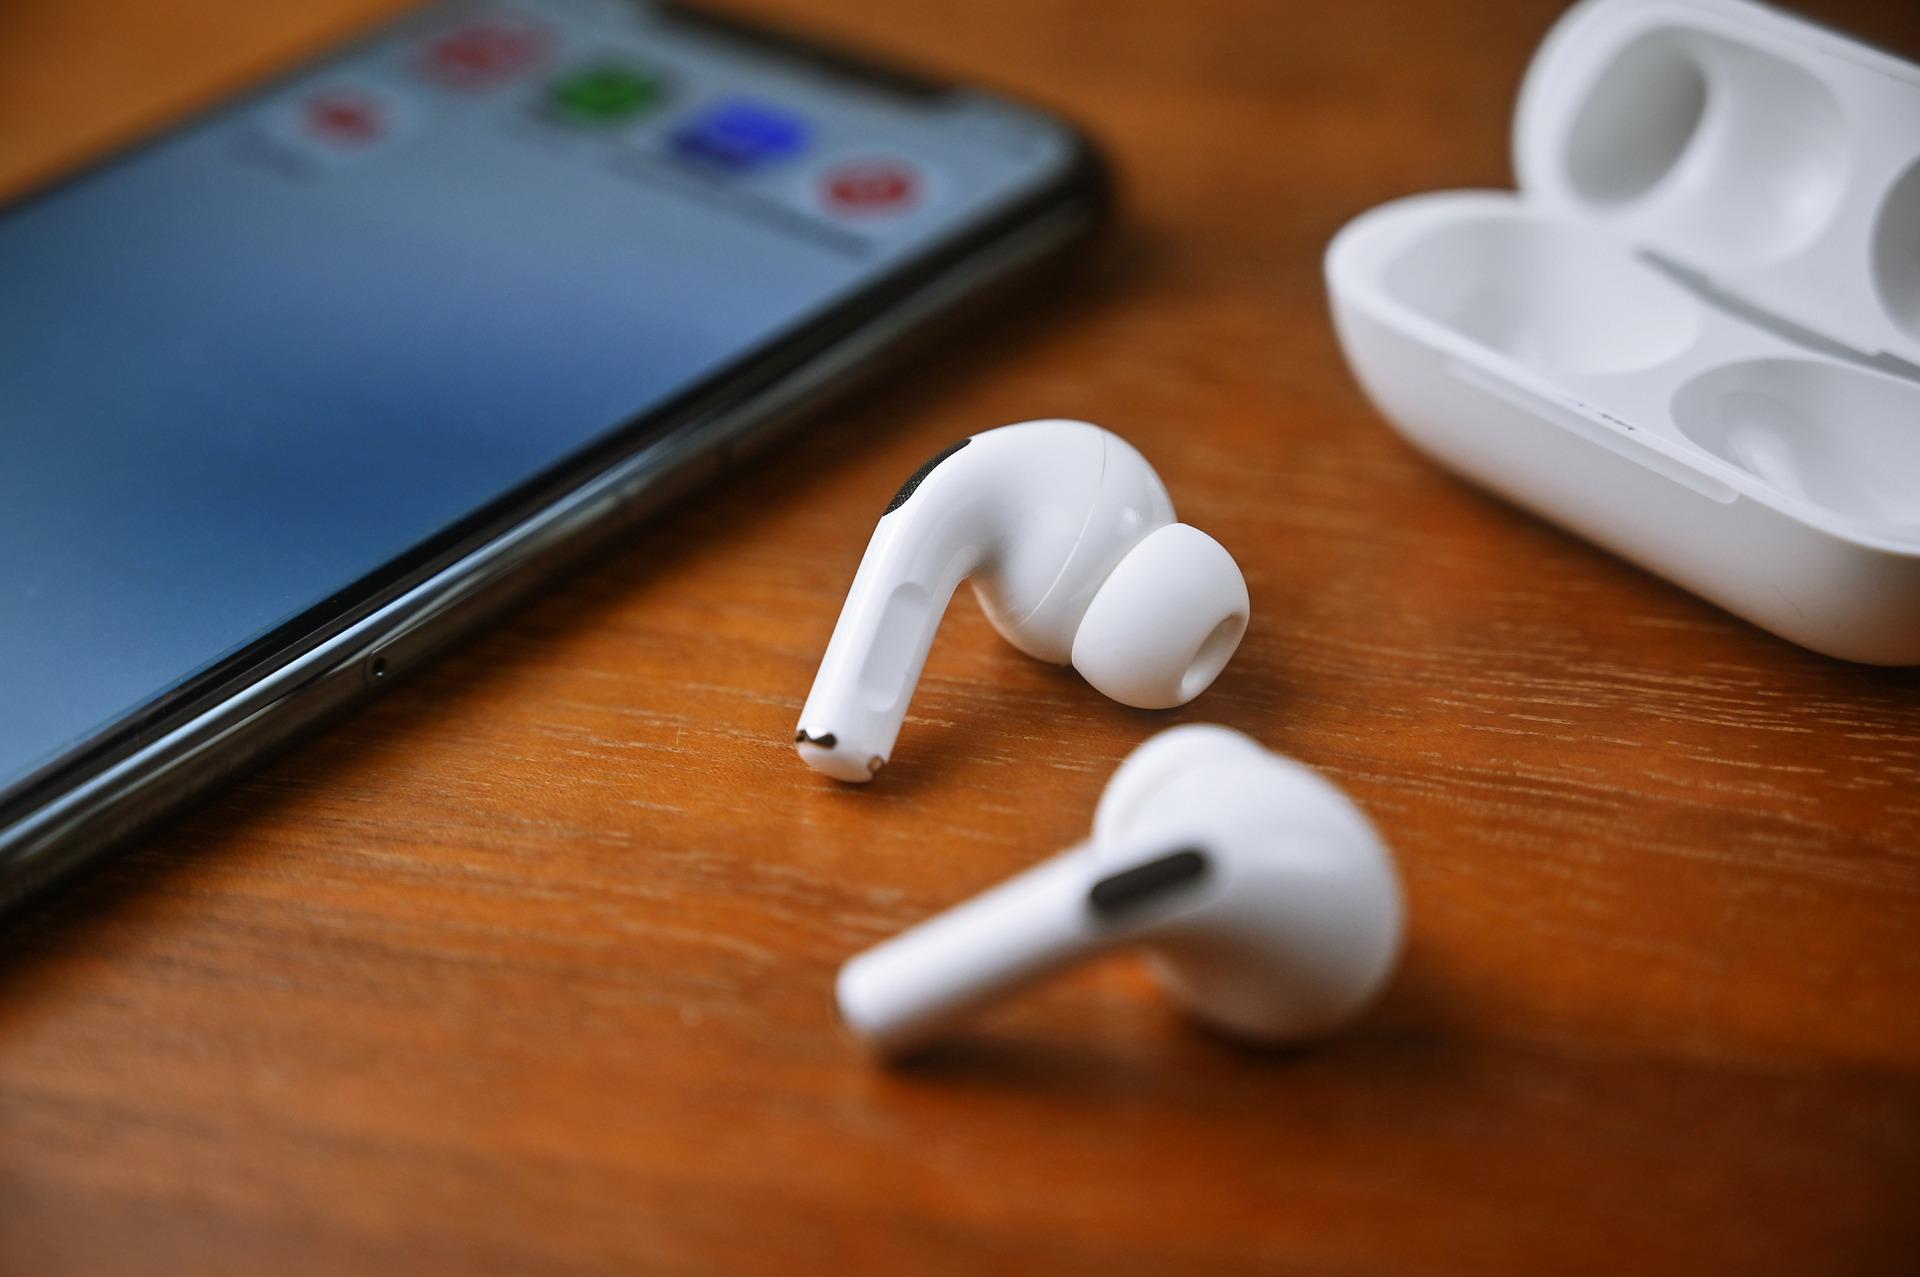 How to pause AirPods – 4 Different methods